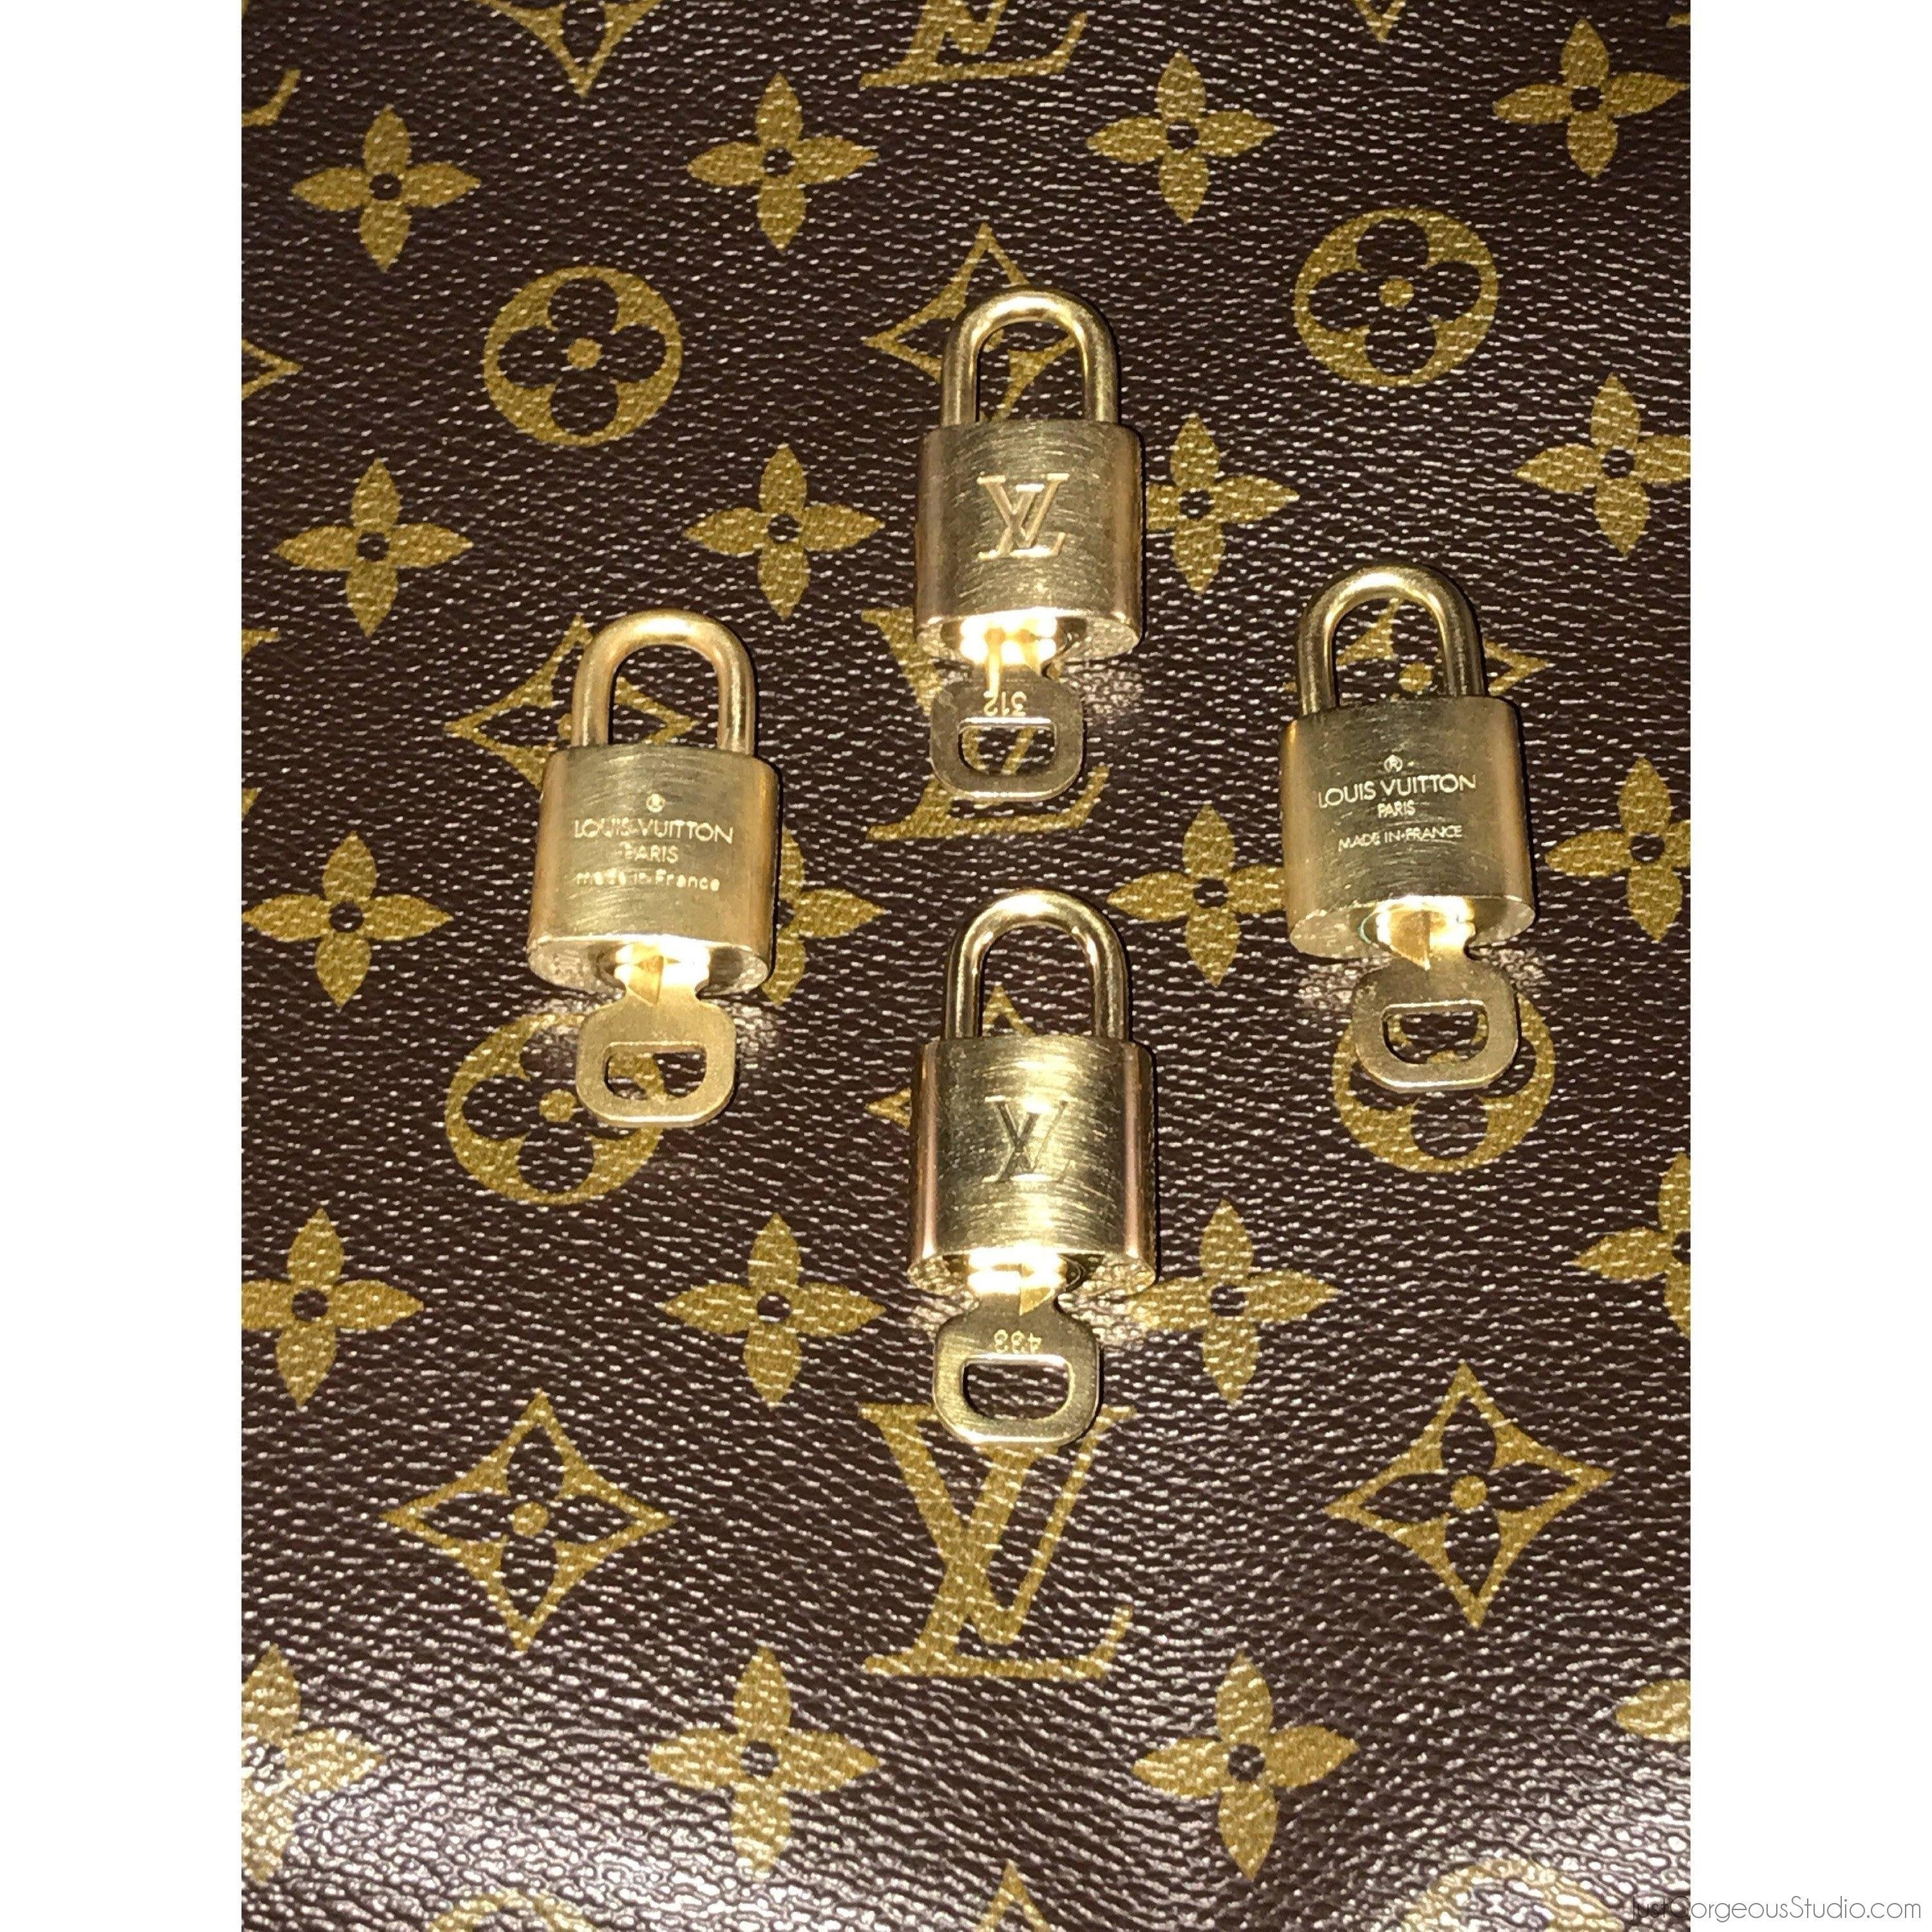 Pinkerly Special Louis Vuitton Padlock and One Key 343 Lock 